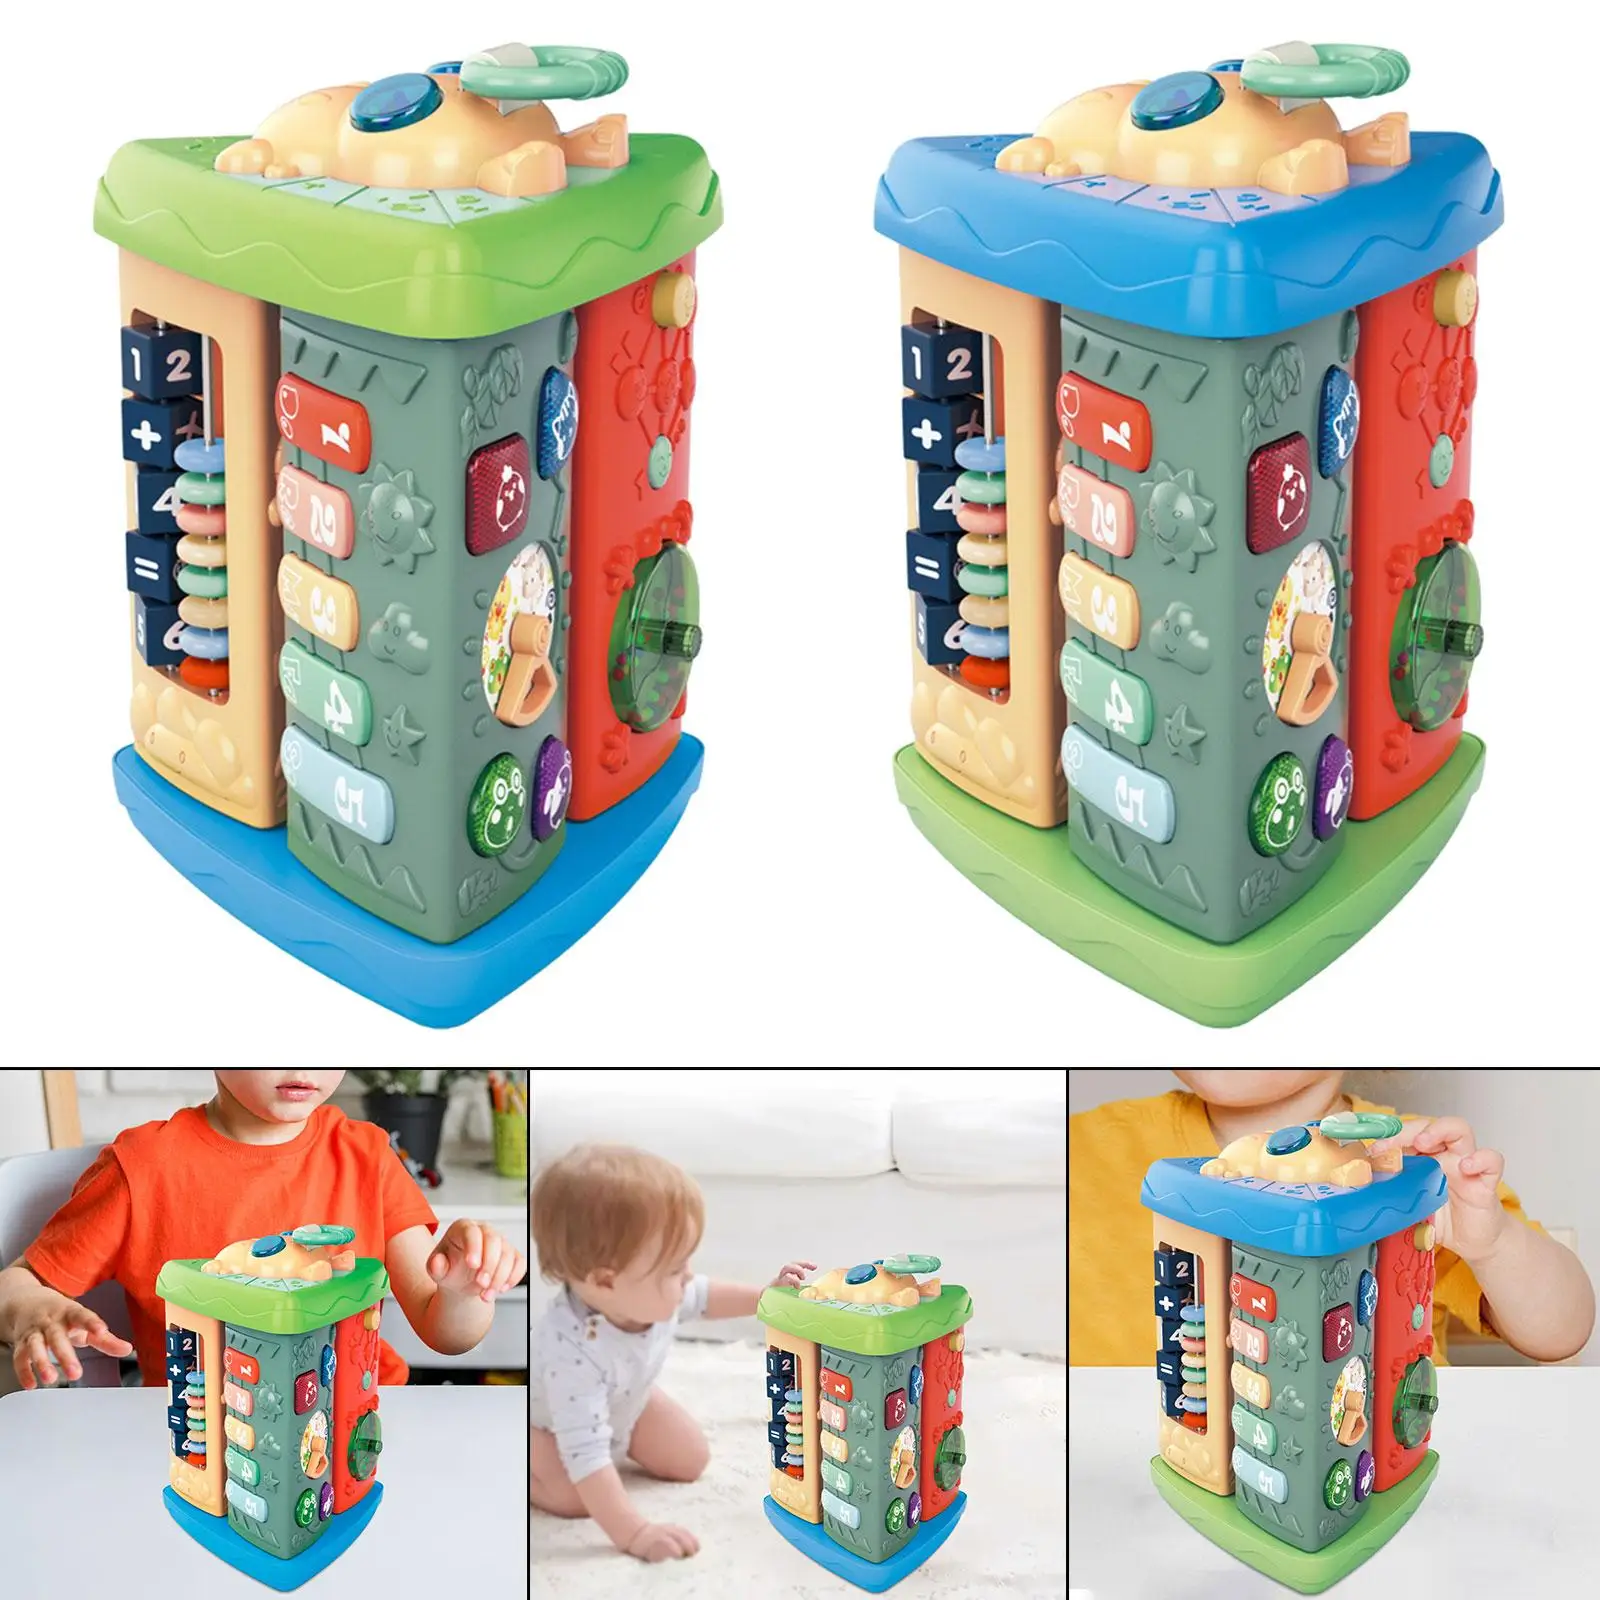 Creative Musical Activity Toys Busy Board for Kids 1 2 3 Birthday Gifts